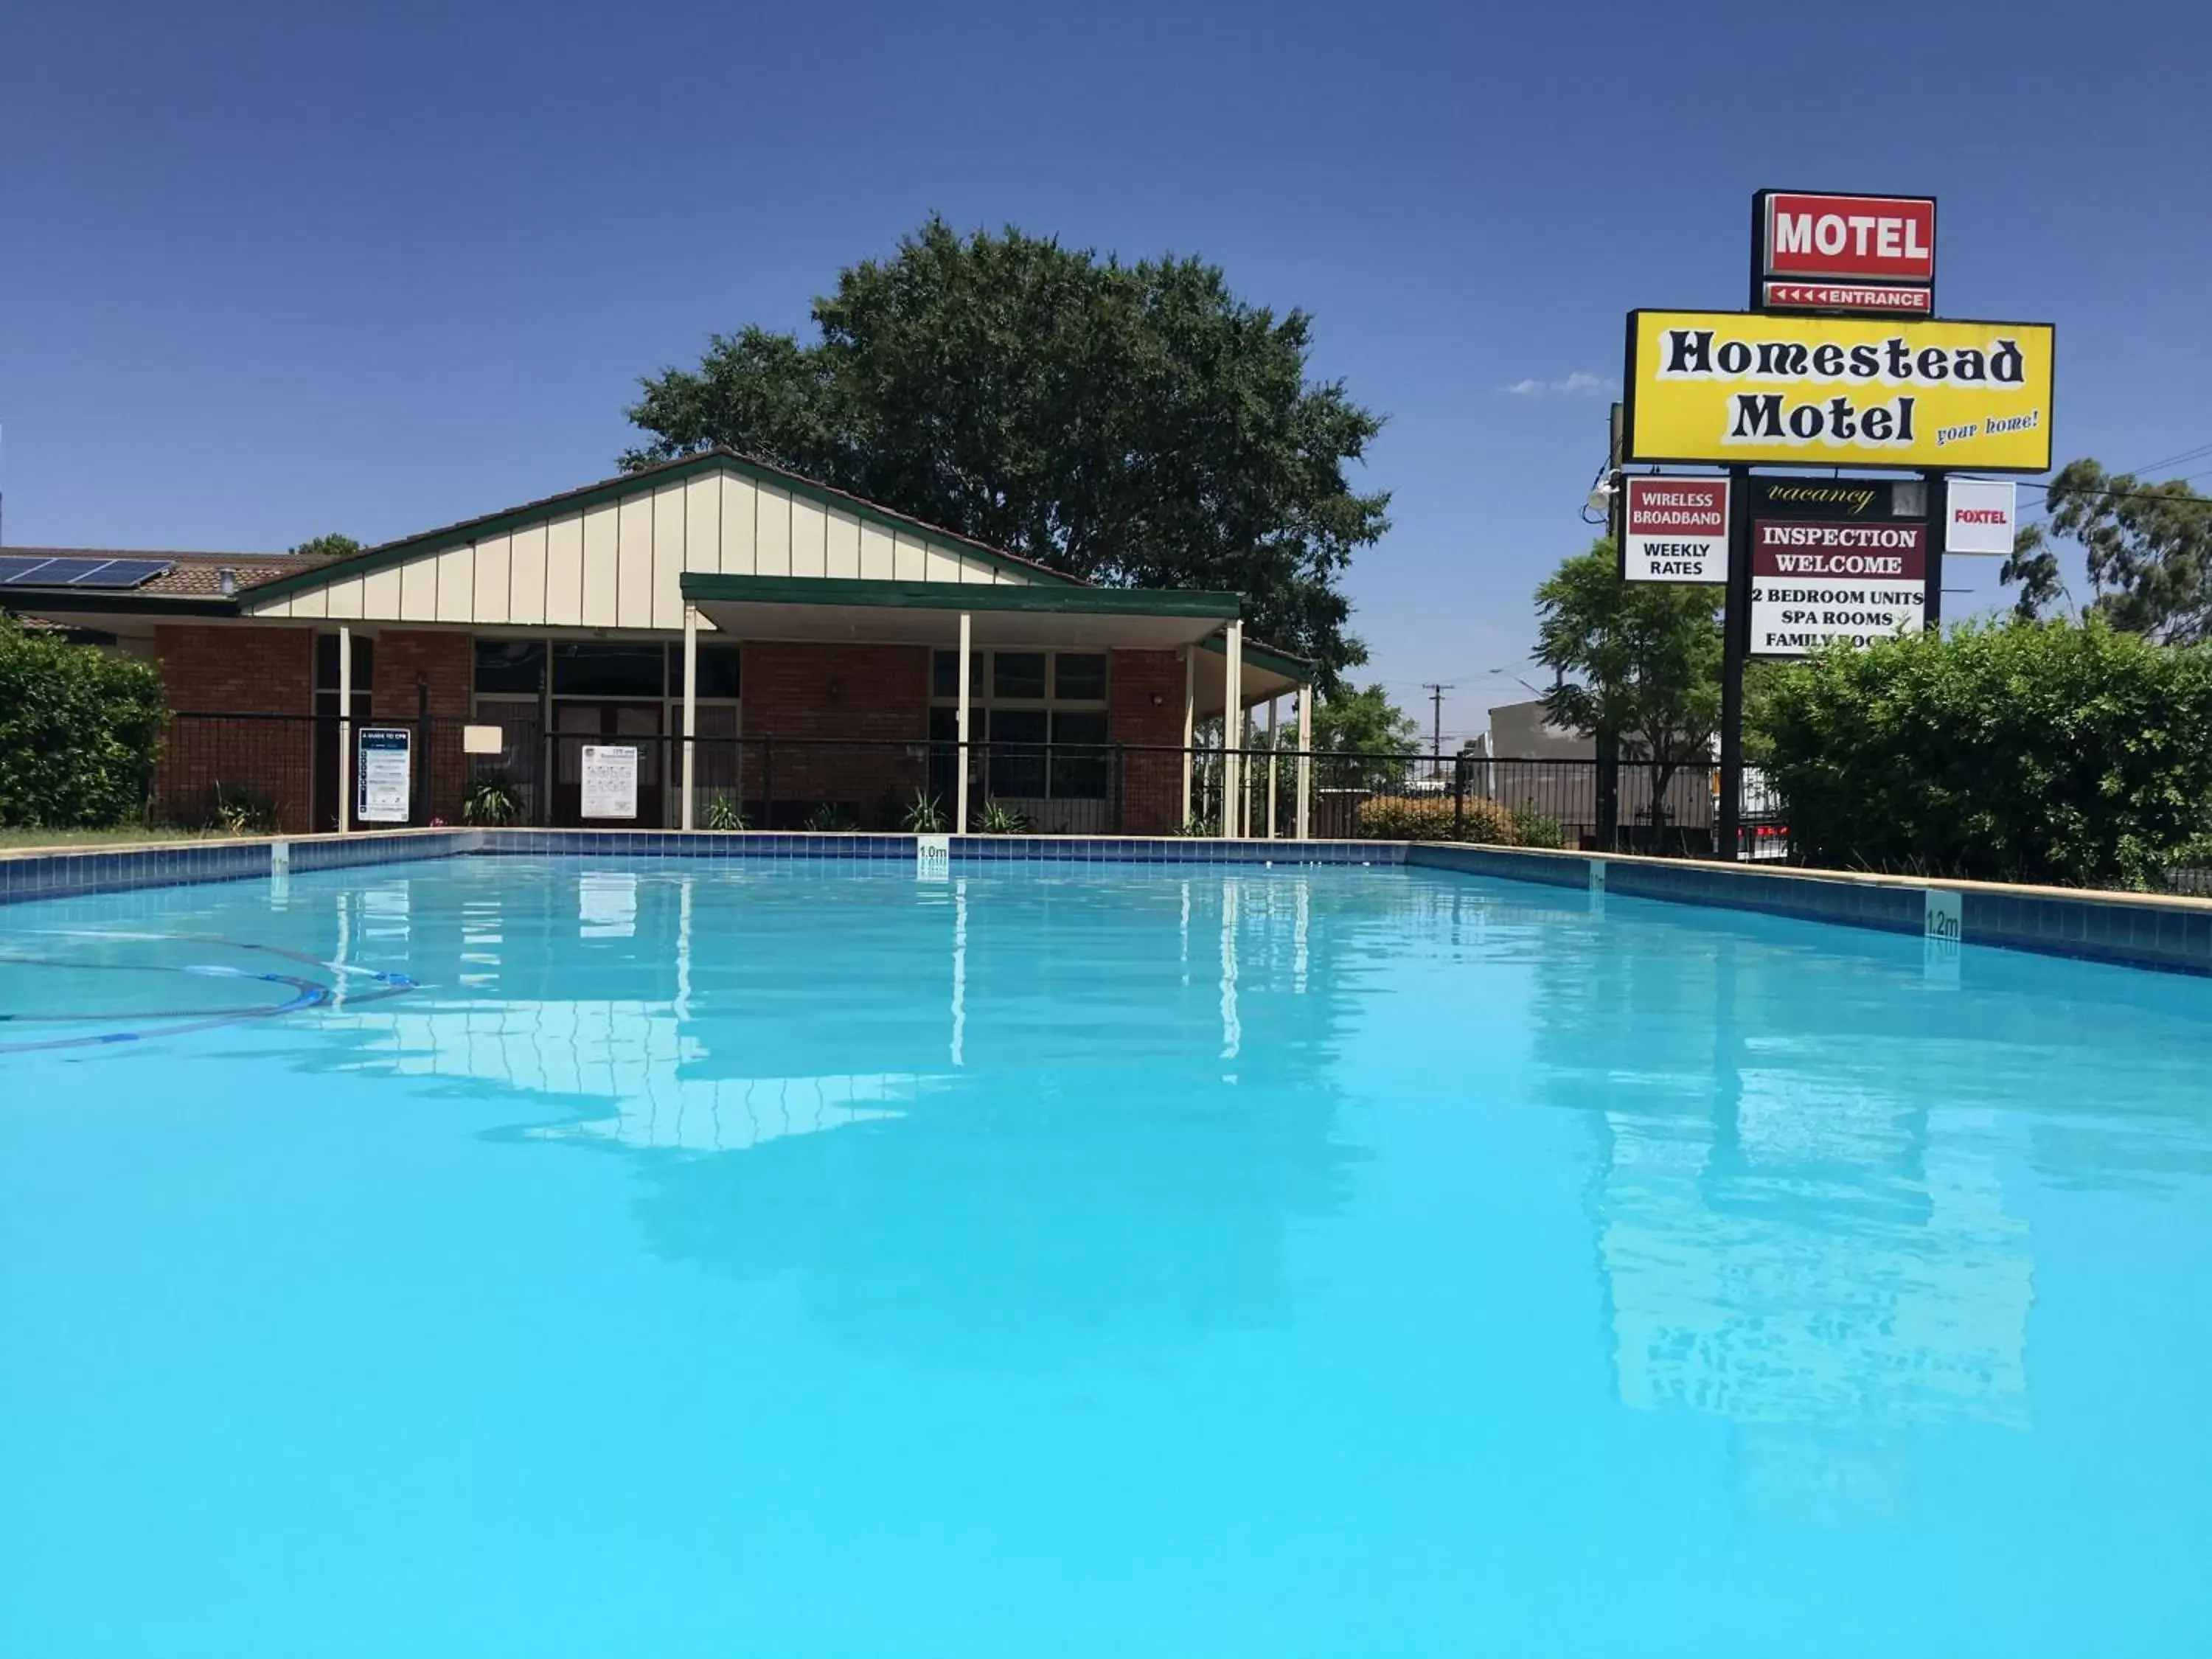 Property building, Swimming Pool in Homestead Motel